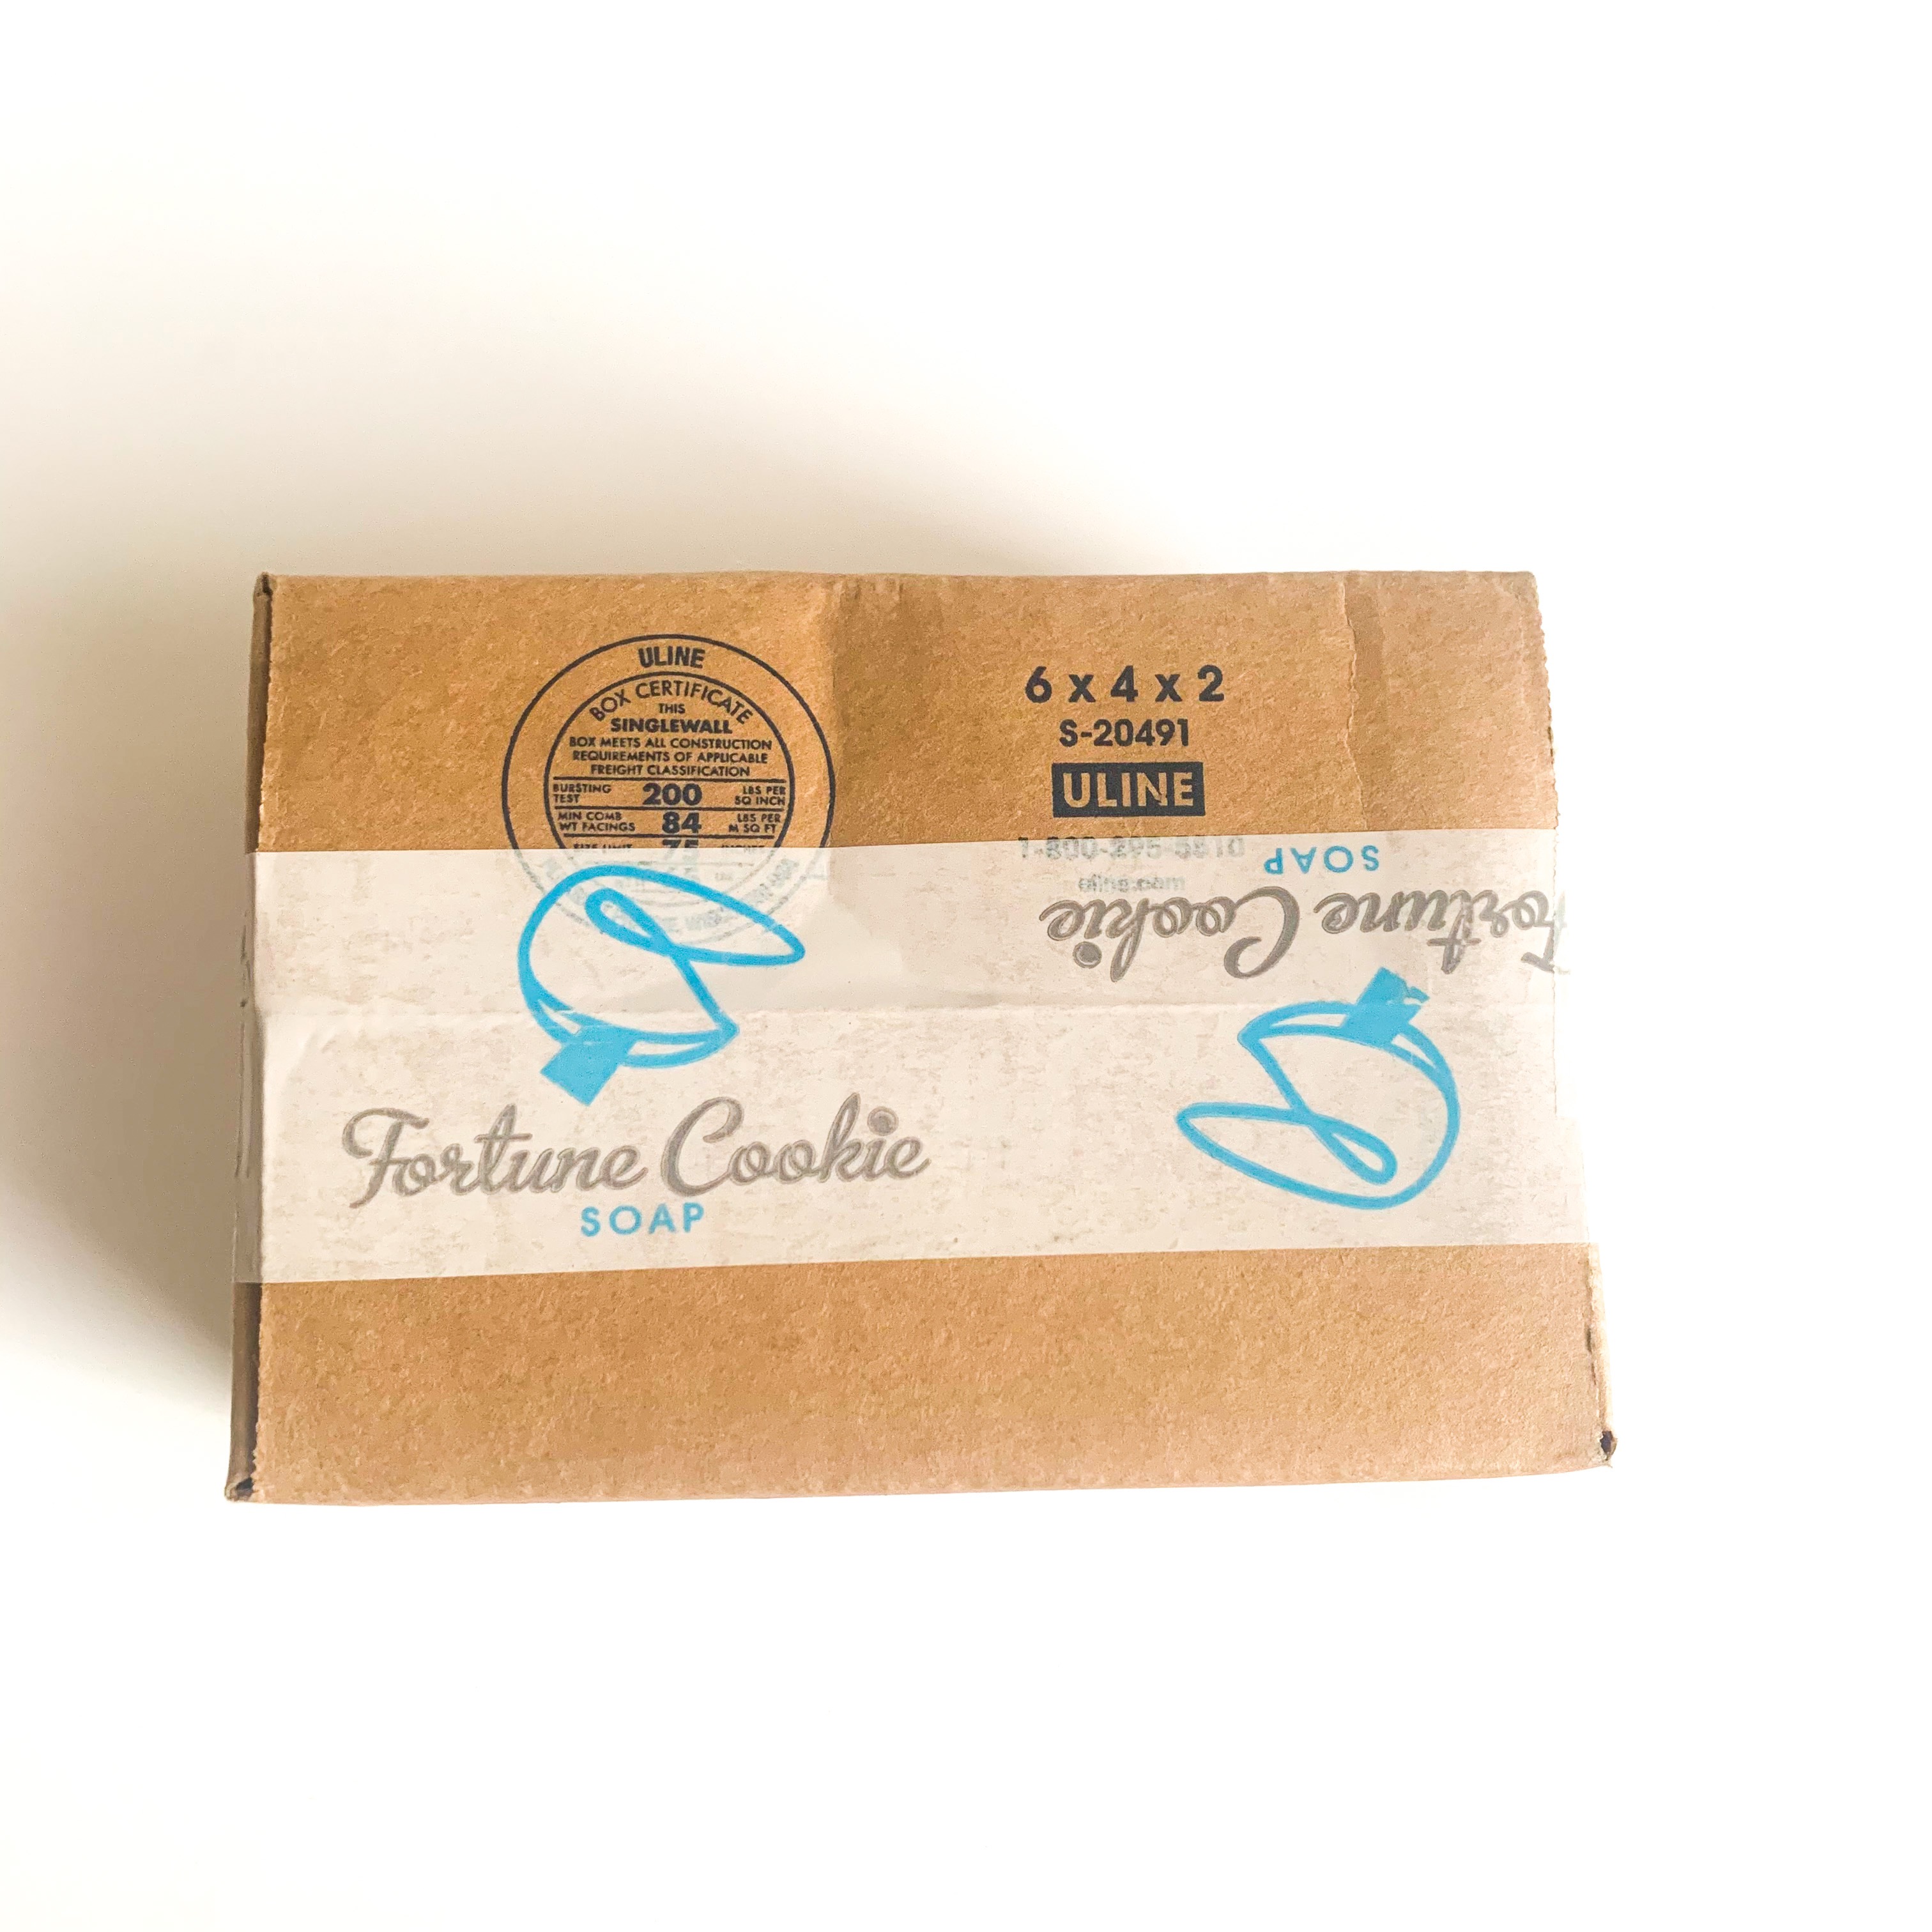 Fortune Cookie Soap Subscription Box Review – February 2021